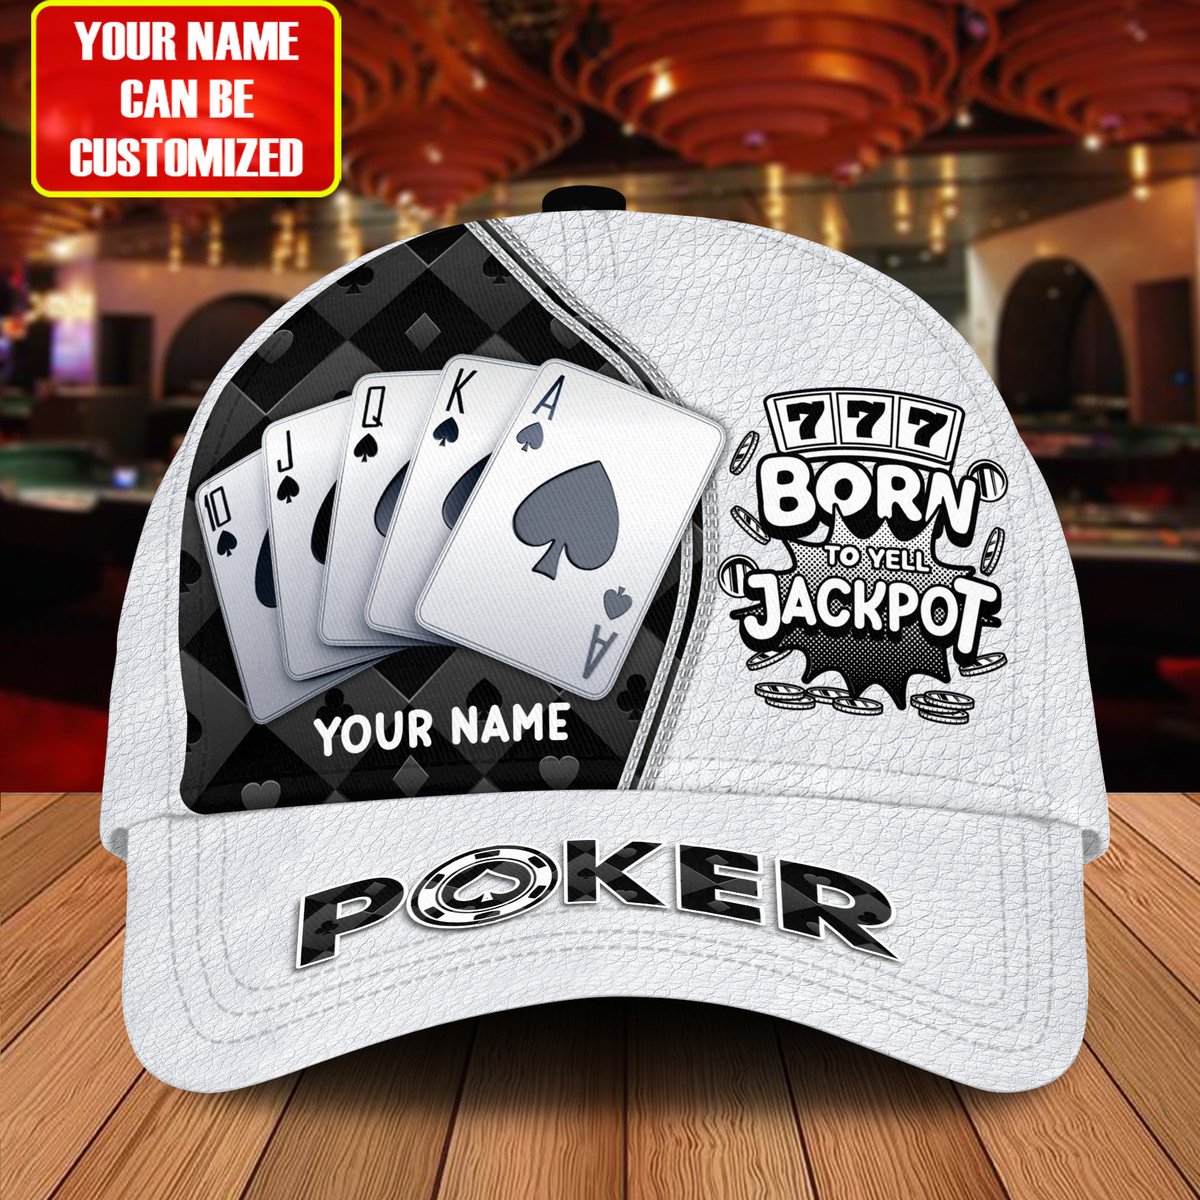 Personalized Name Poker Jackpot Classic Cap/ Born To Yell Jackpot Funny Cap/ Poker Hat